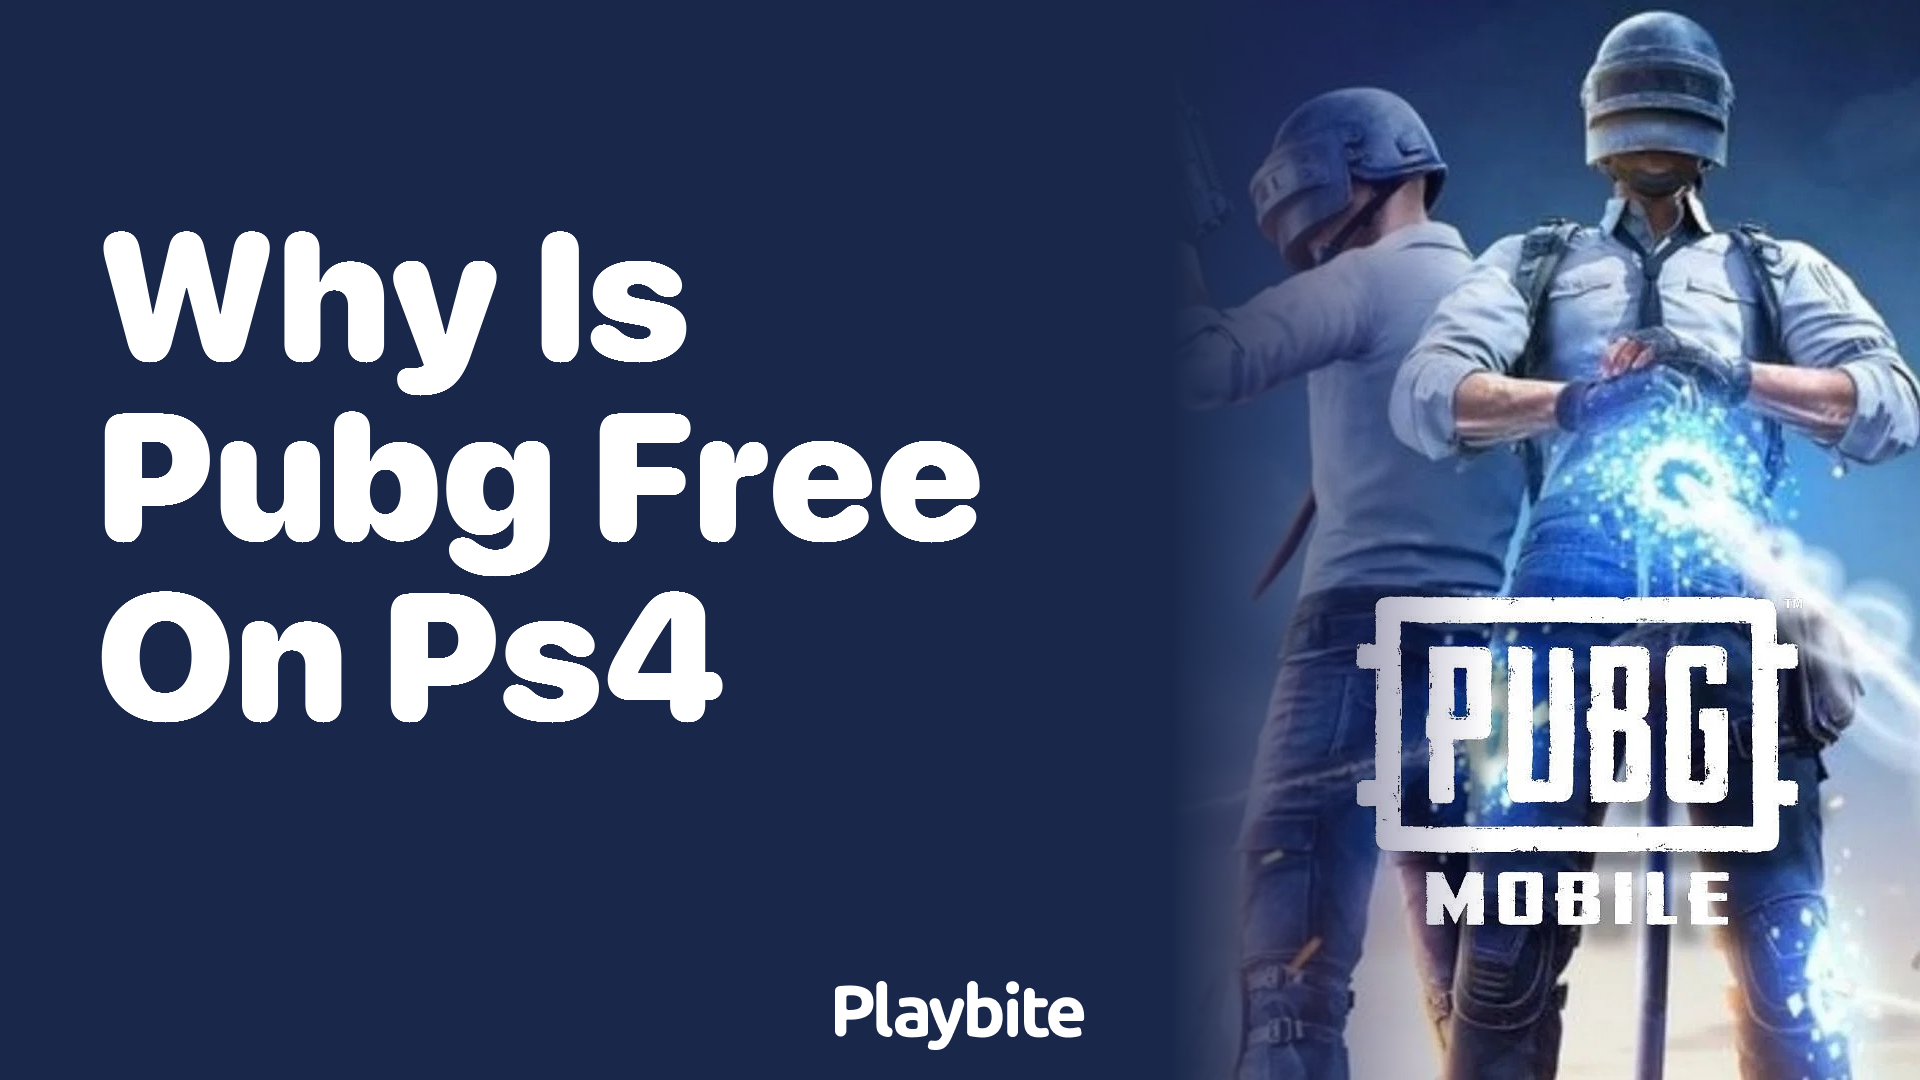 Why Is PUBG Free on PS4?